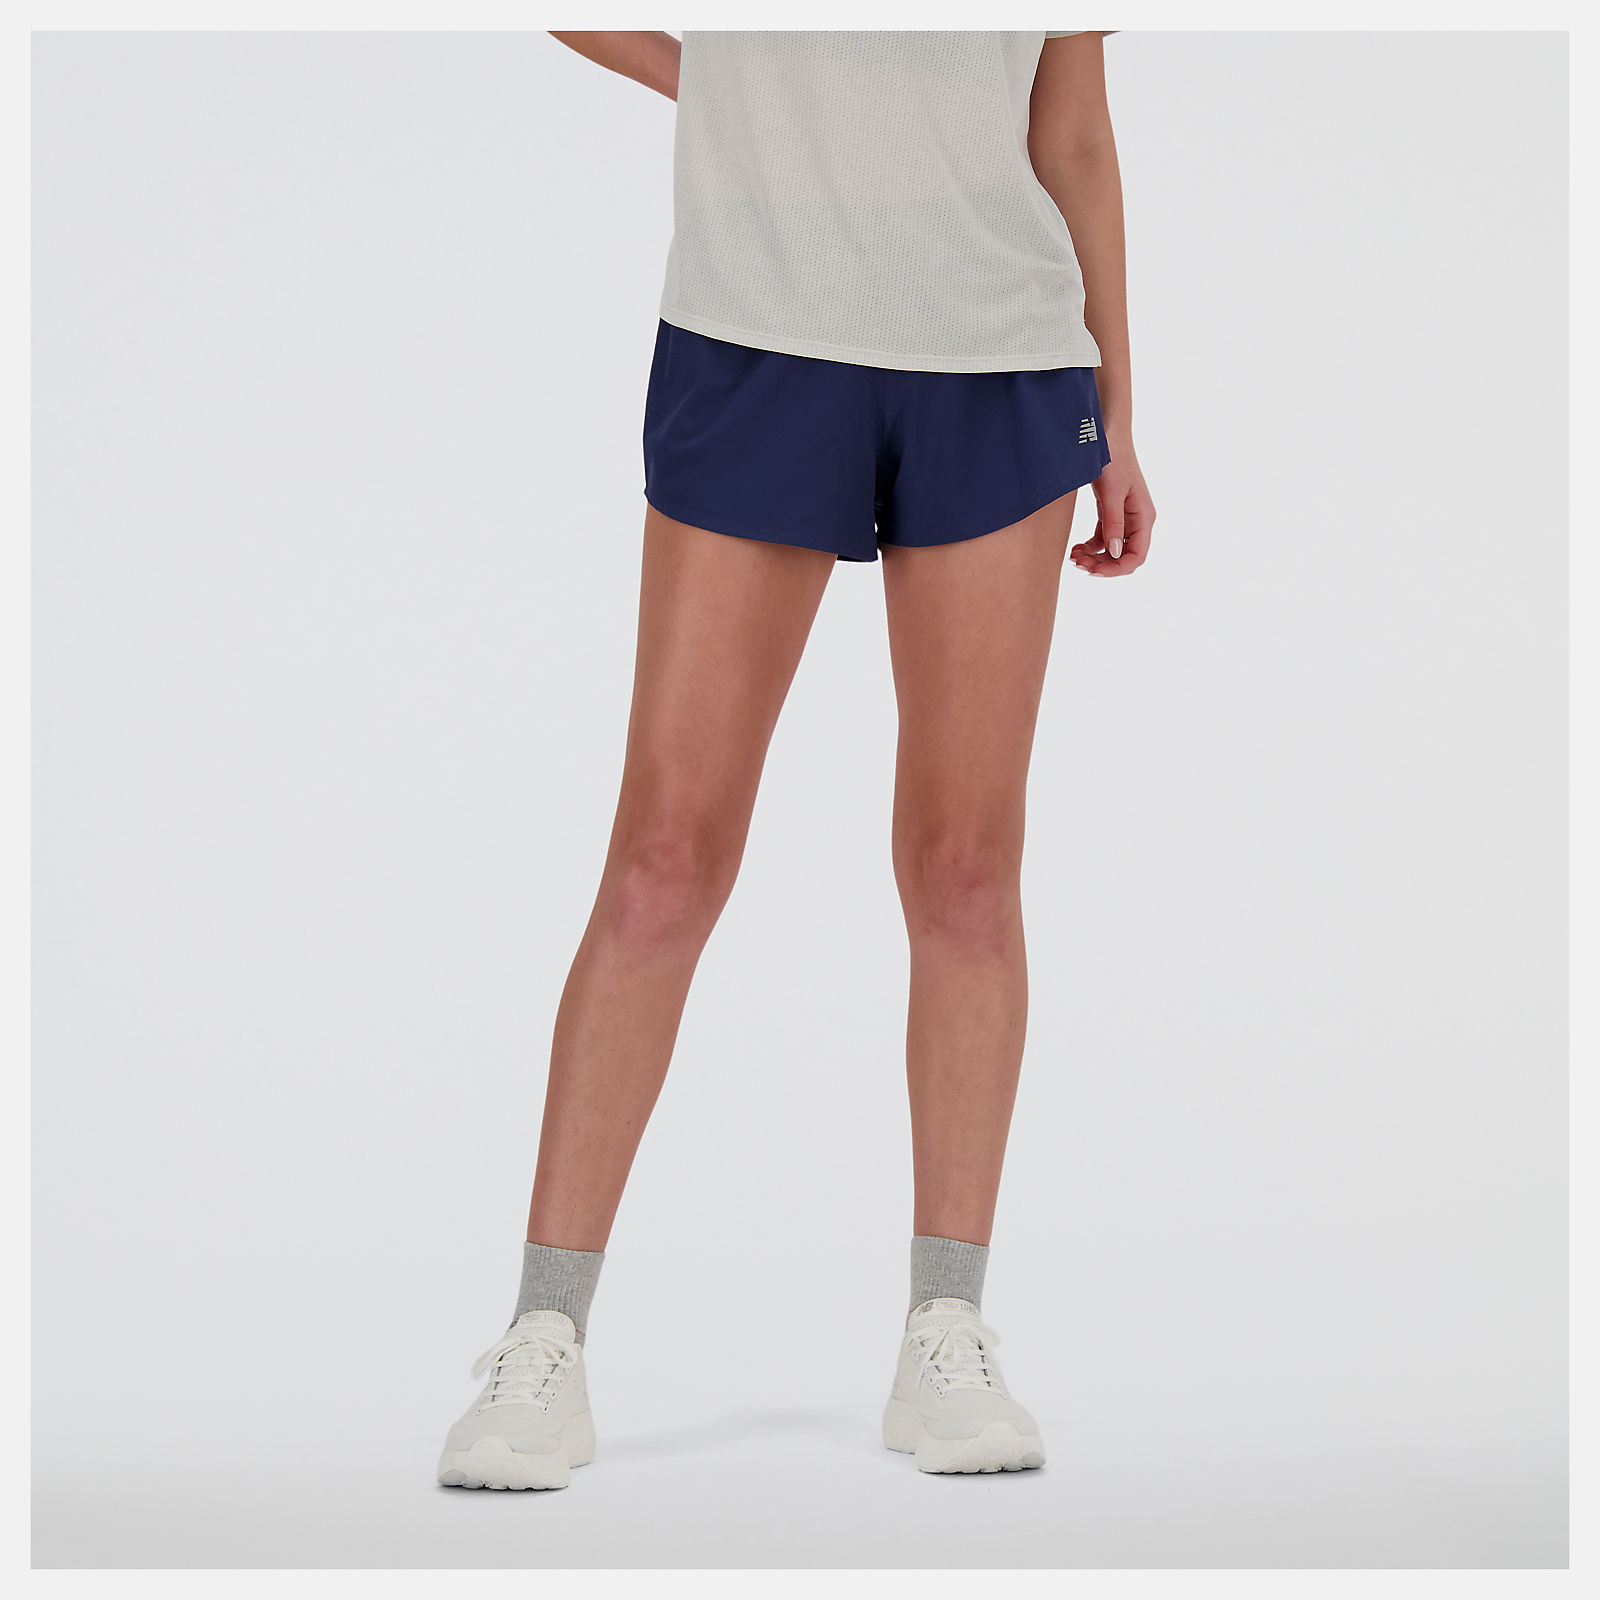 New Balance RC Short 3 in